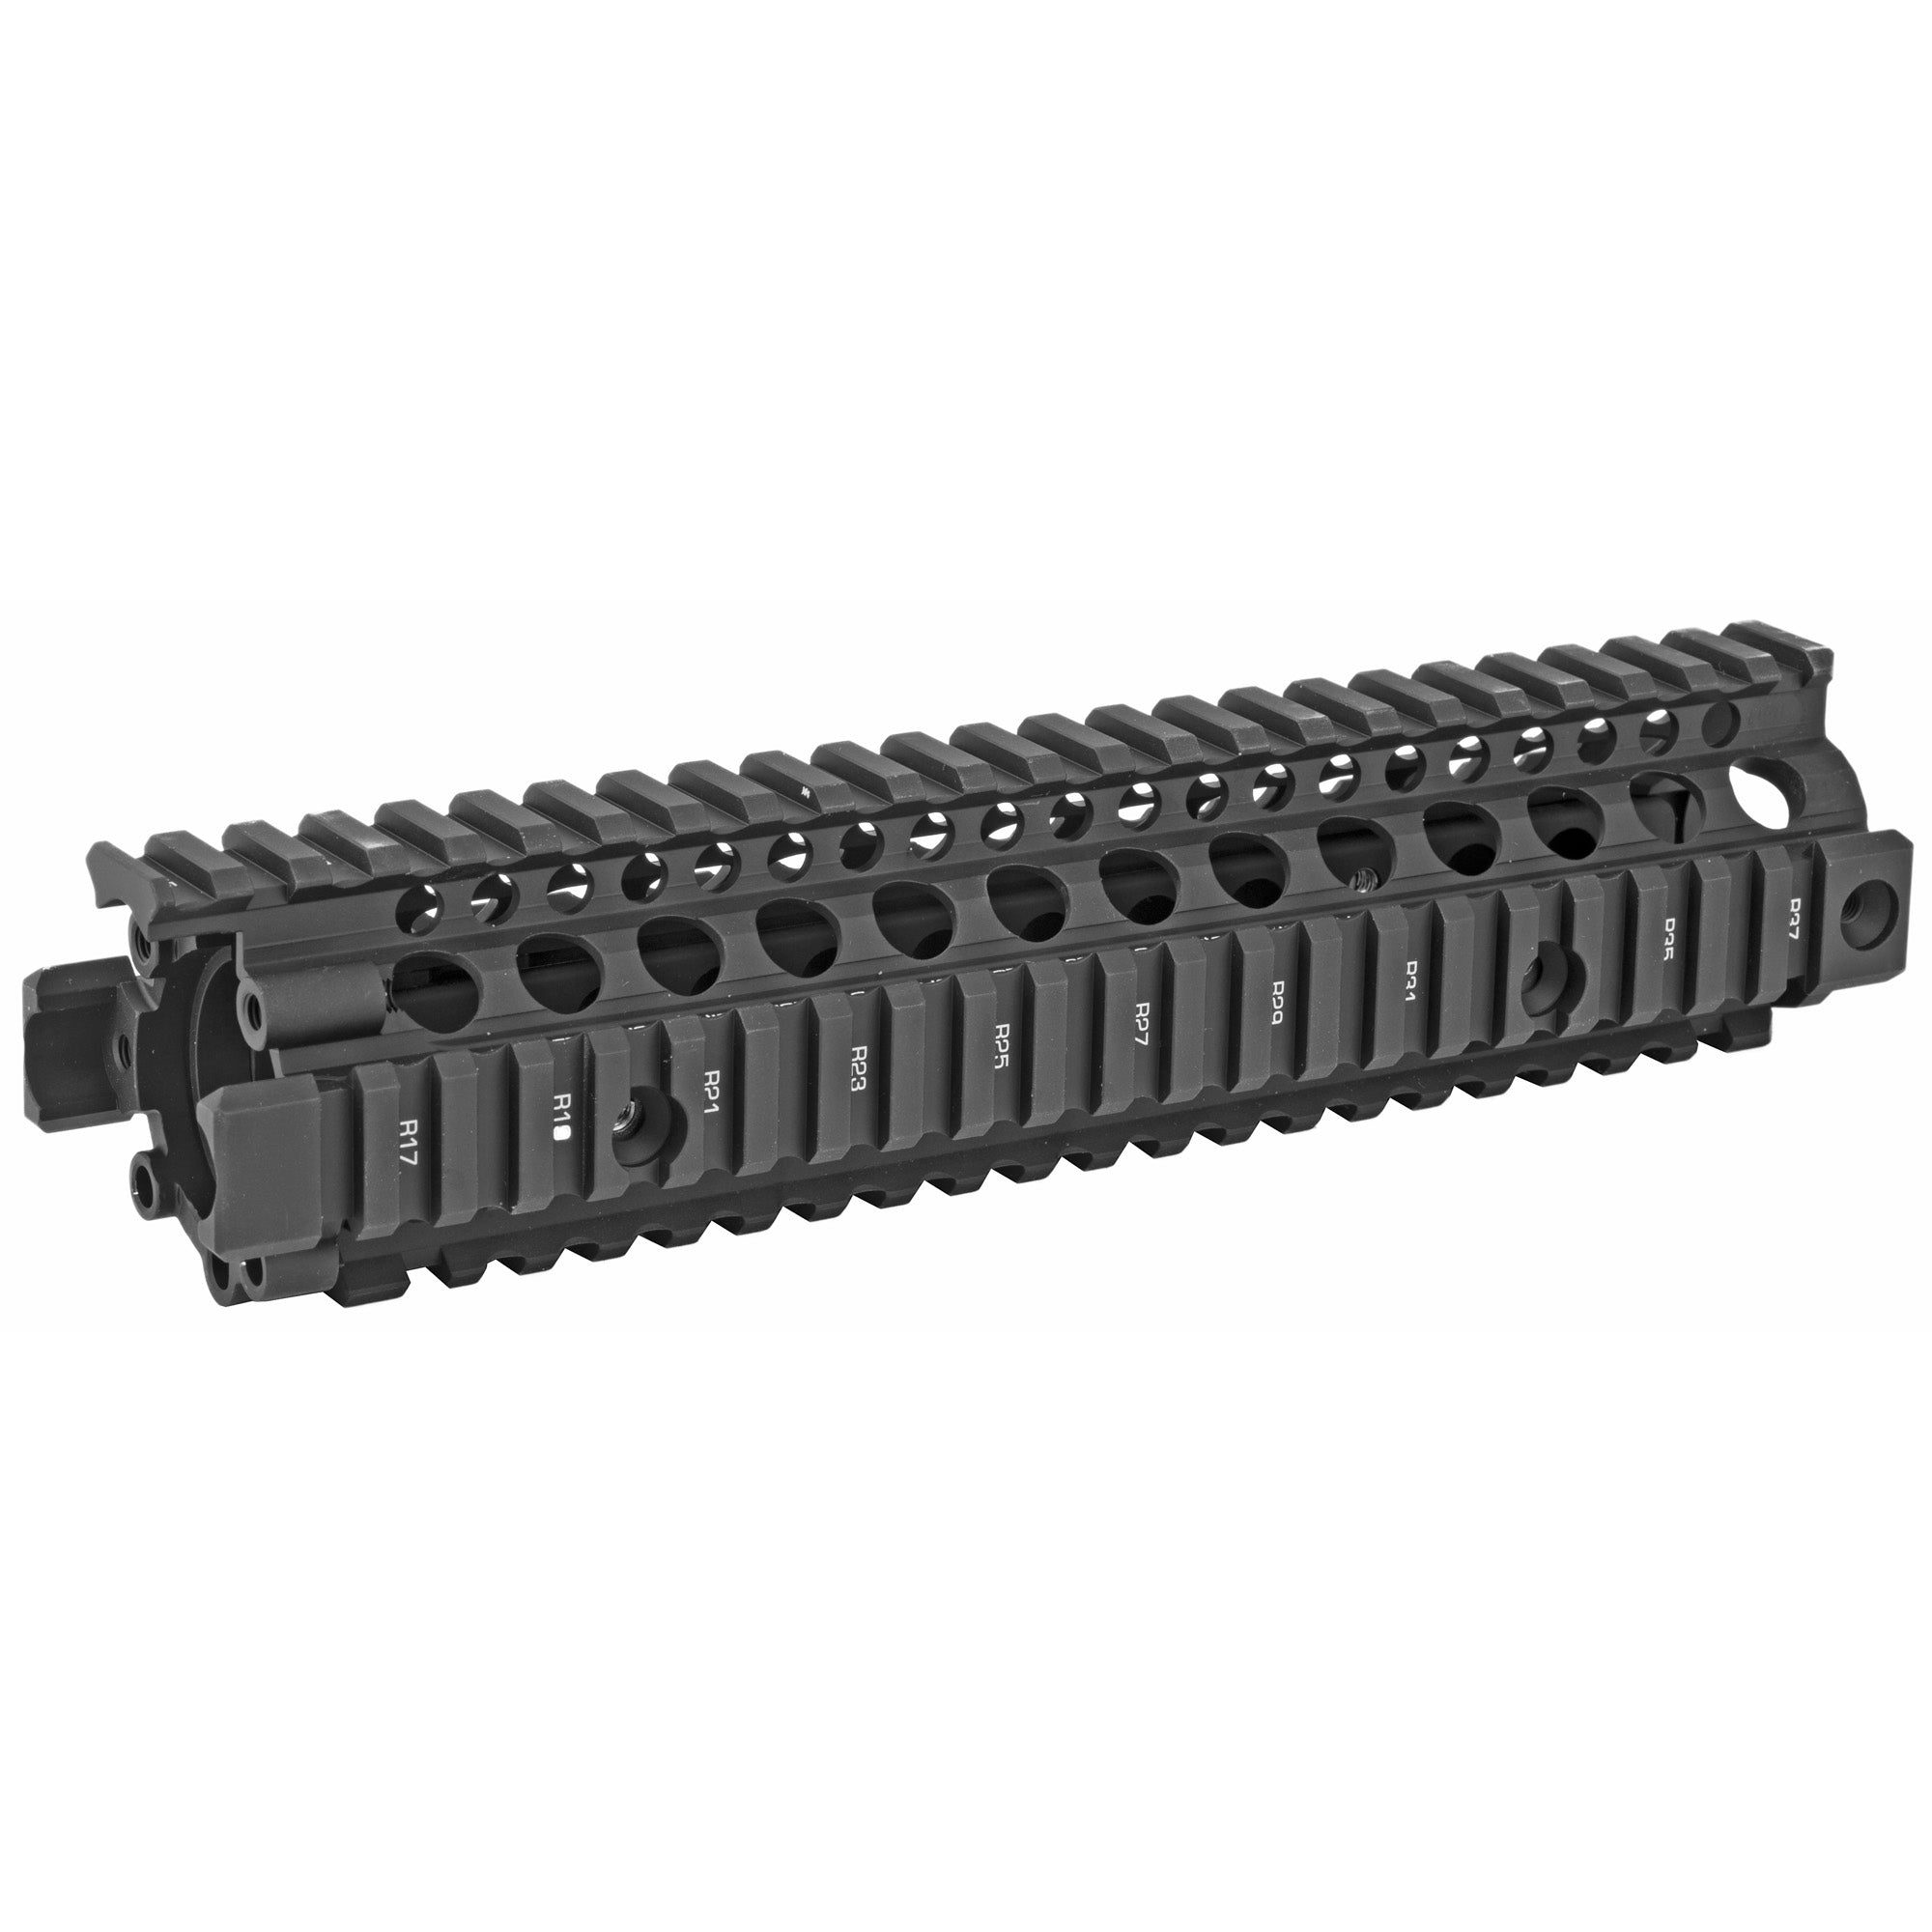 Daniel Defense MK18 RIS II Rail System, 9.55 inches, black free float quad rail for AR rifles, featuring aircraft-grade aluminum construction and Mil-Spec Type III finish